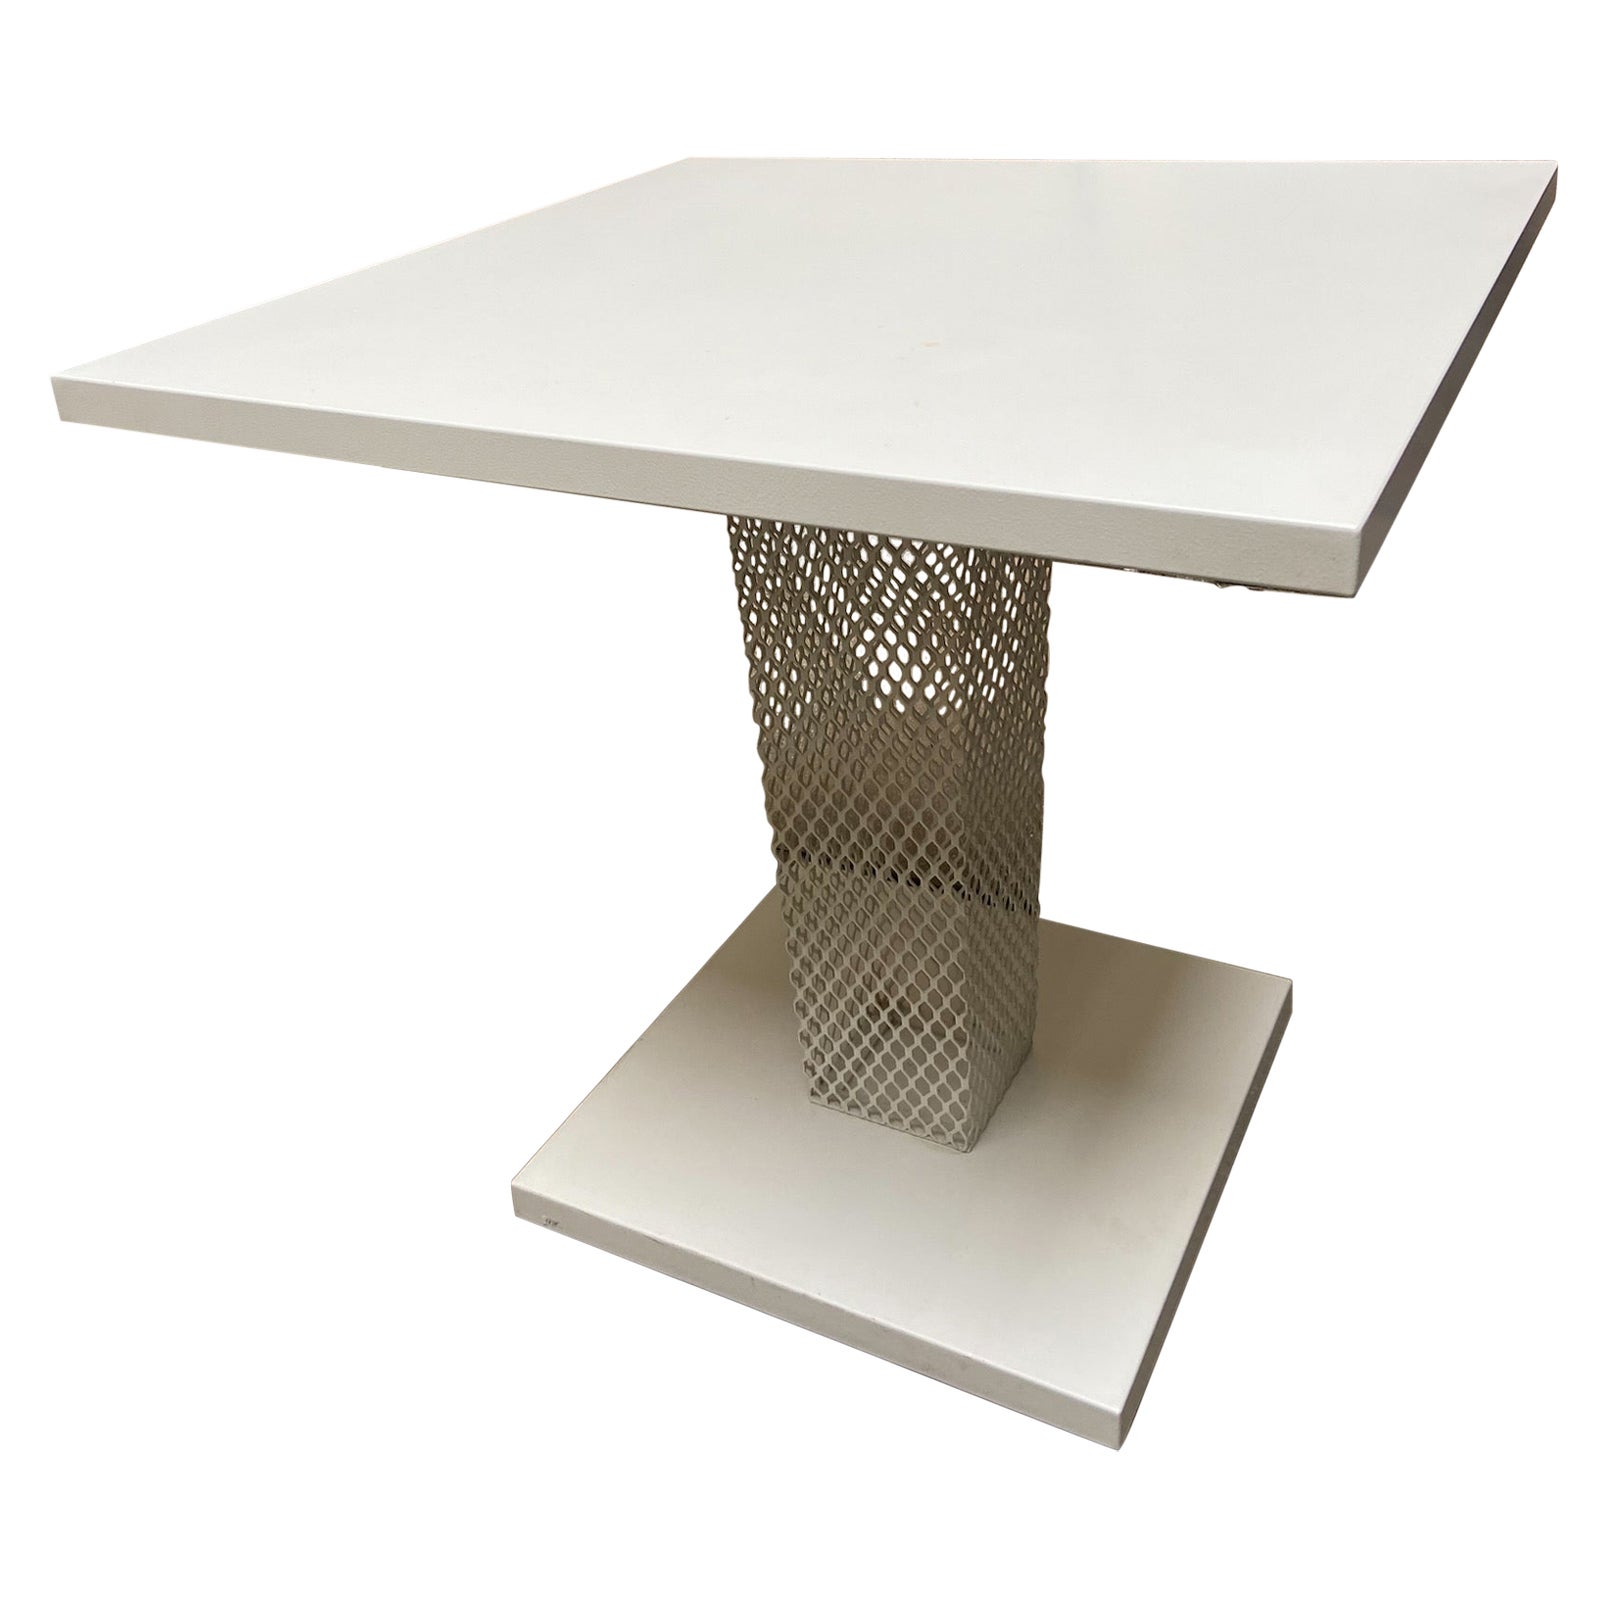 Ivy Model Table, Paola Navone, 2010 For Sale